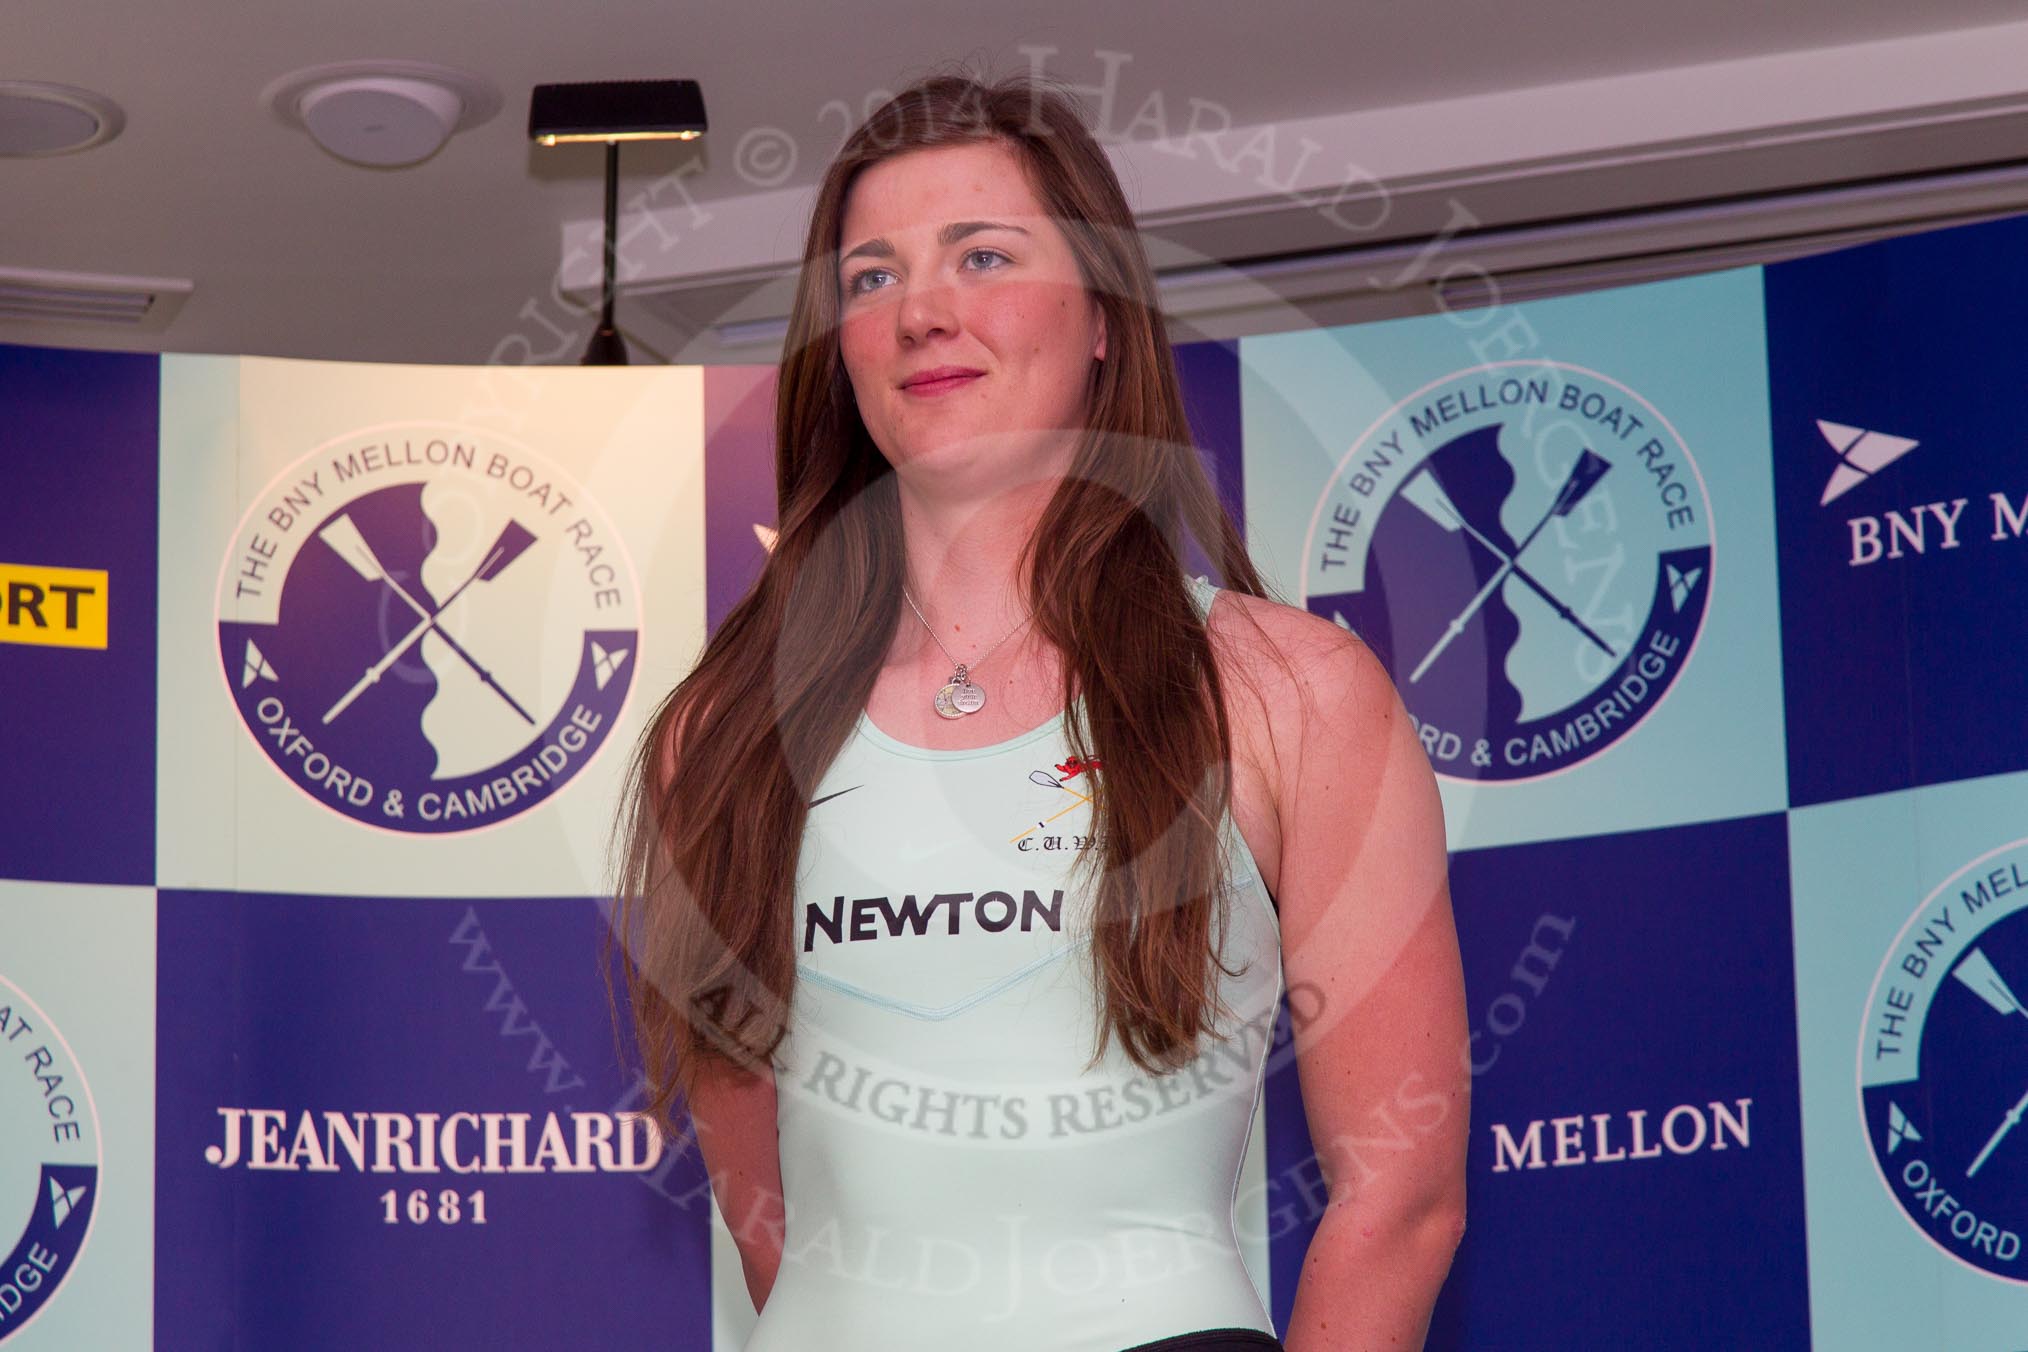 The Boat Race season 2014 - Crew Announcement and Weigh In: The 2014 Women's Boat Race crews: Cambridge 2 seat Kate Ashley - 75kg..
BNY Mellon Centre,
London EC4V 4LA,
London,
United Kingdom,
on 10 March 2014 at 11:45, image #18